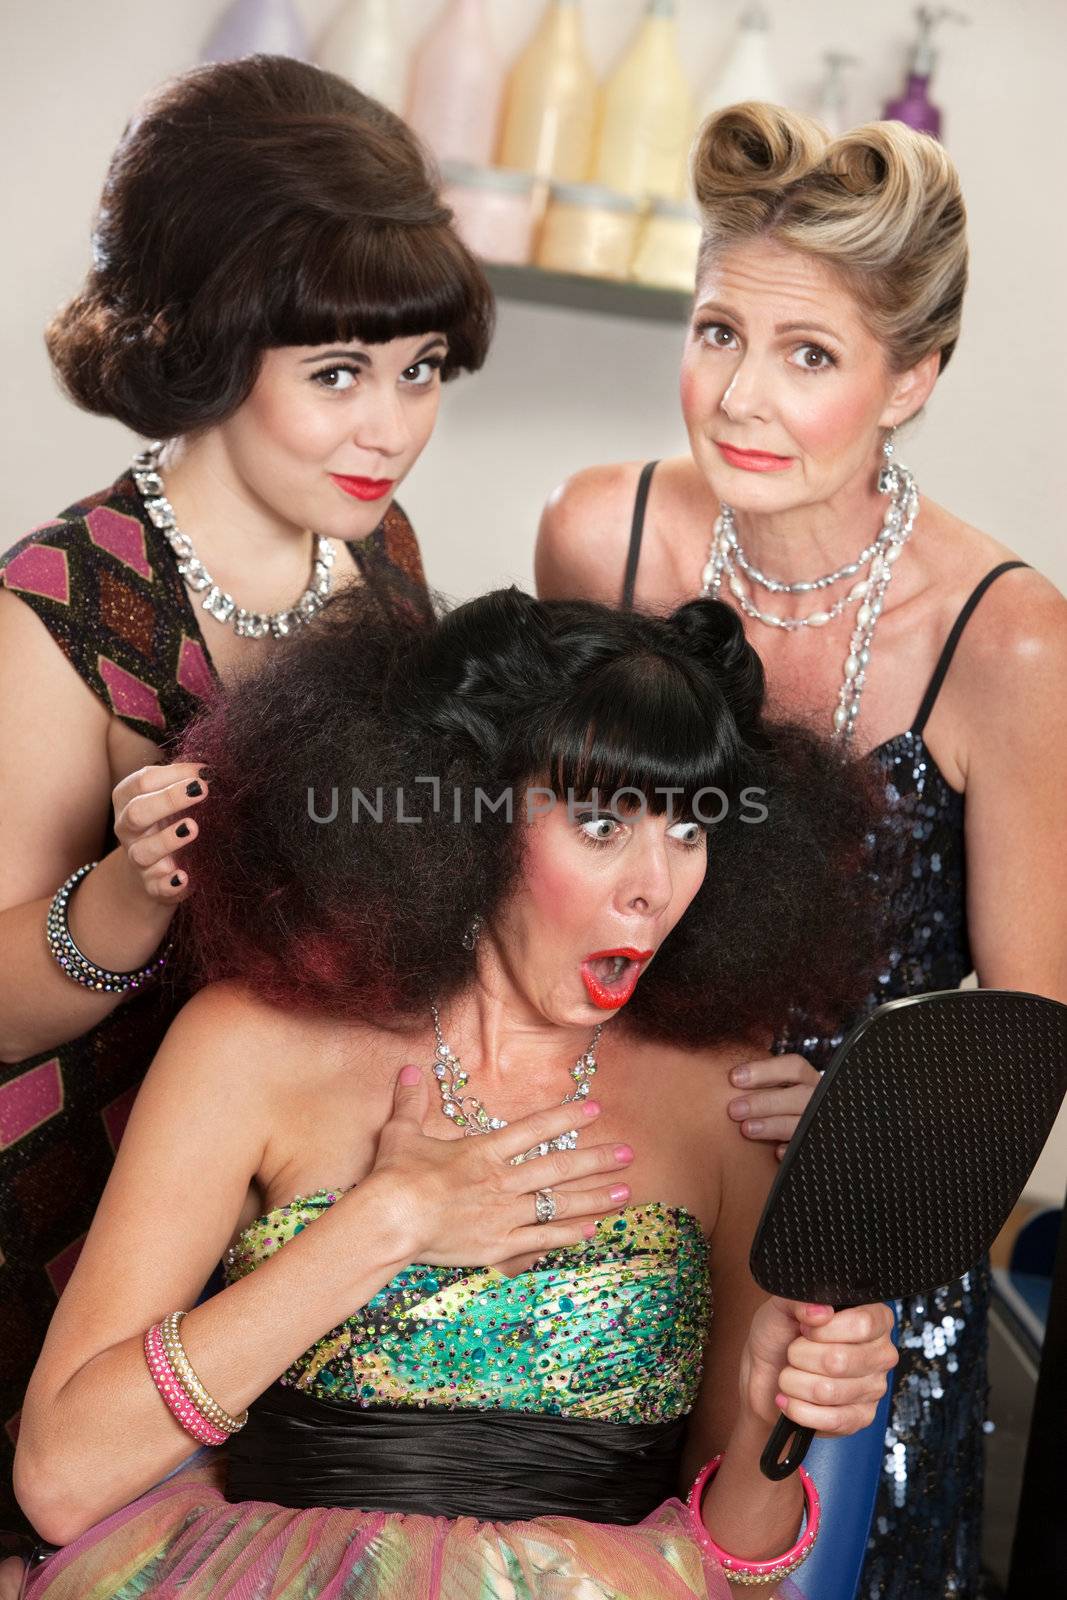 Sympathetic friends and upset woman in beauty salon